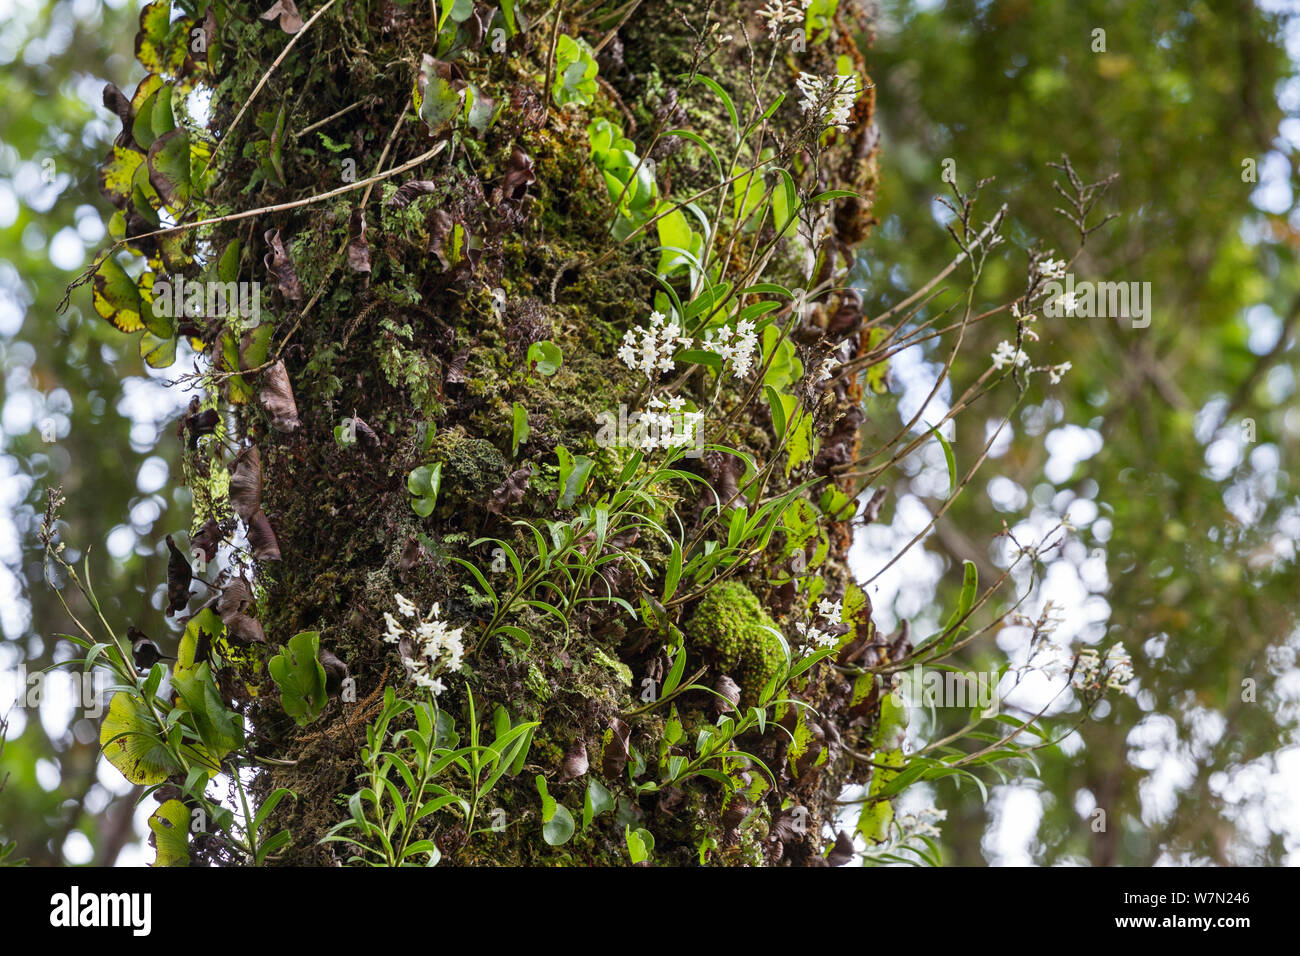 Kidney ferns (Trichomanes reniforme), Easter orchids (Earina autumnalis) in flower, and mosses covering the trunk of a tree. Dusky Sound, Fiordland, South Island, New Zealand Stock Photo